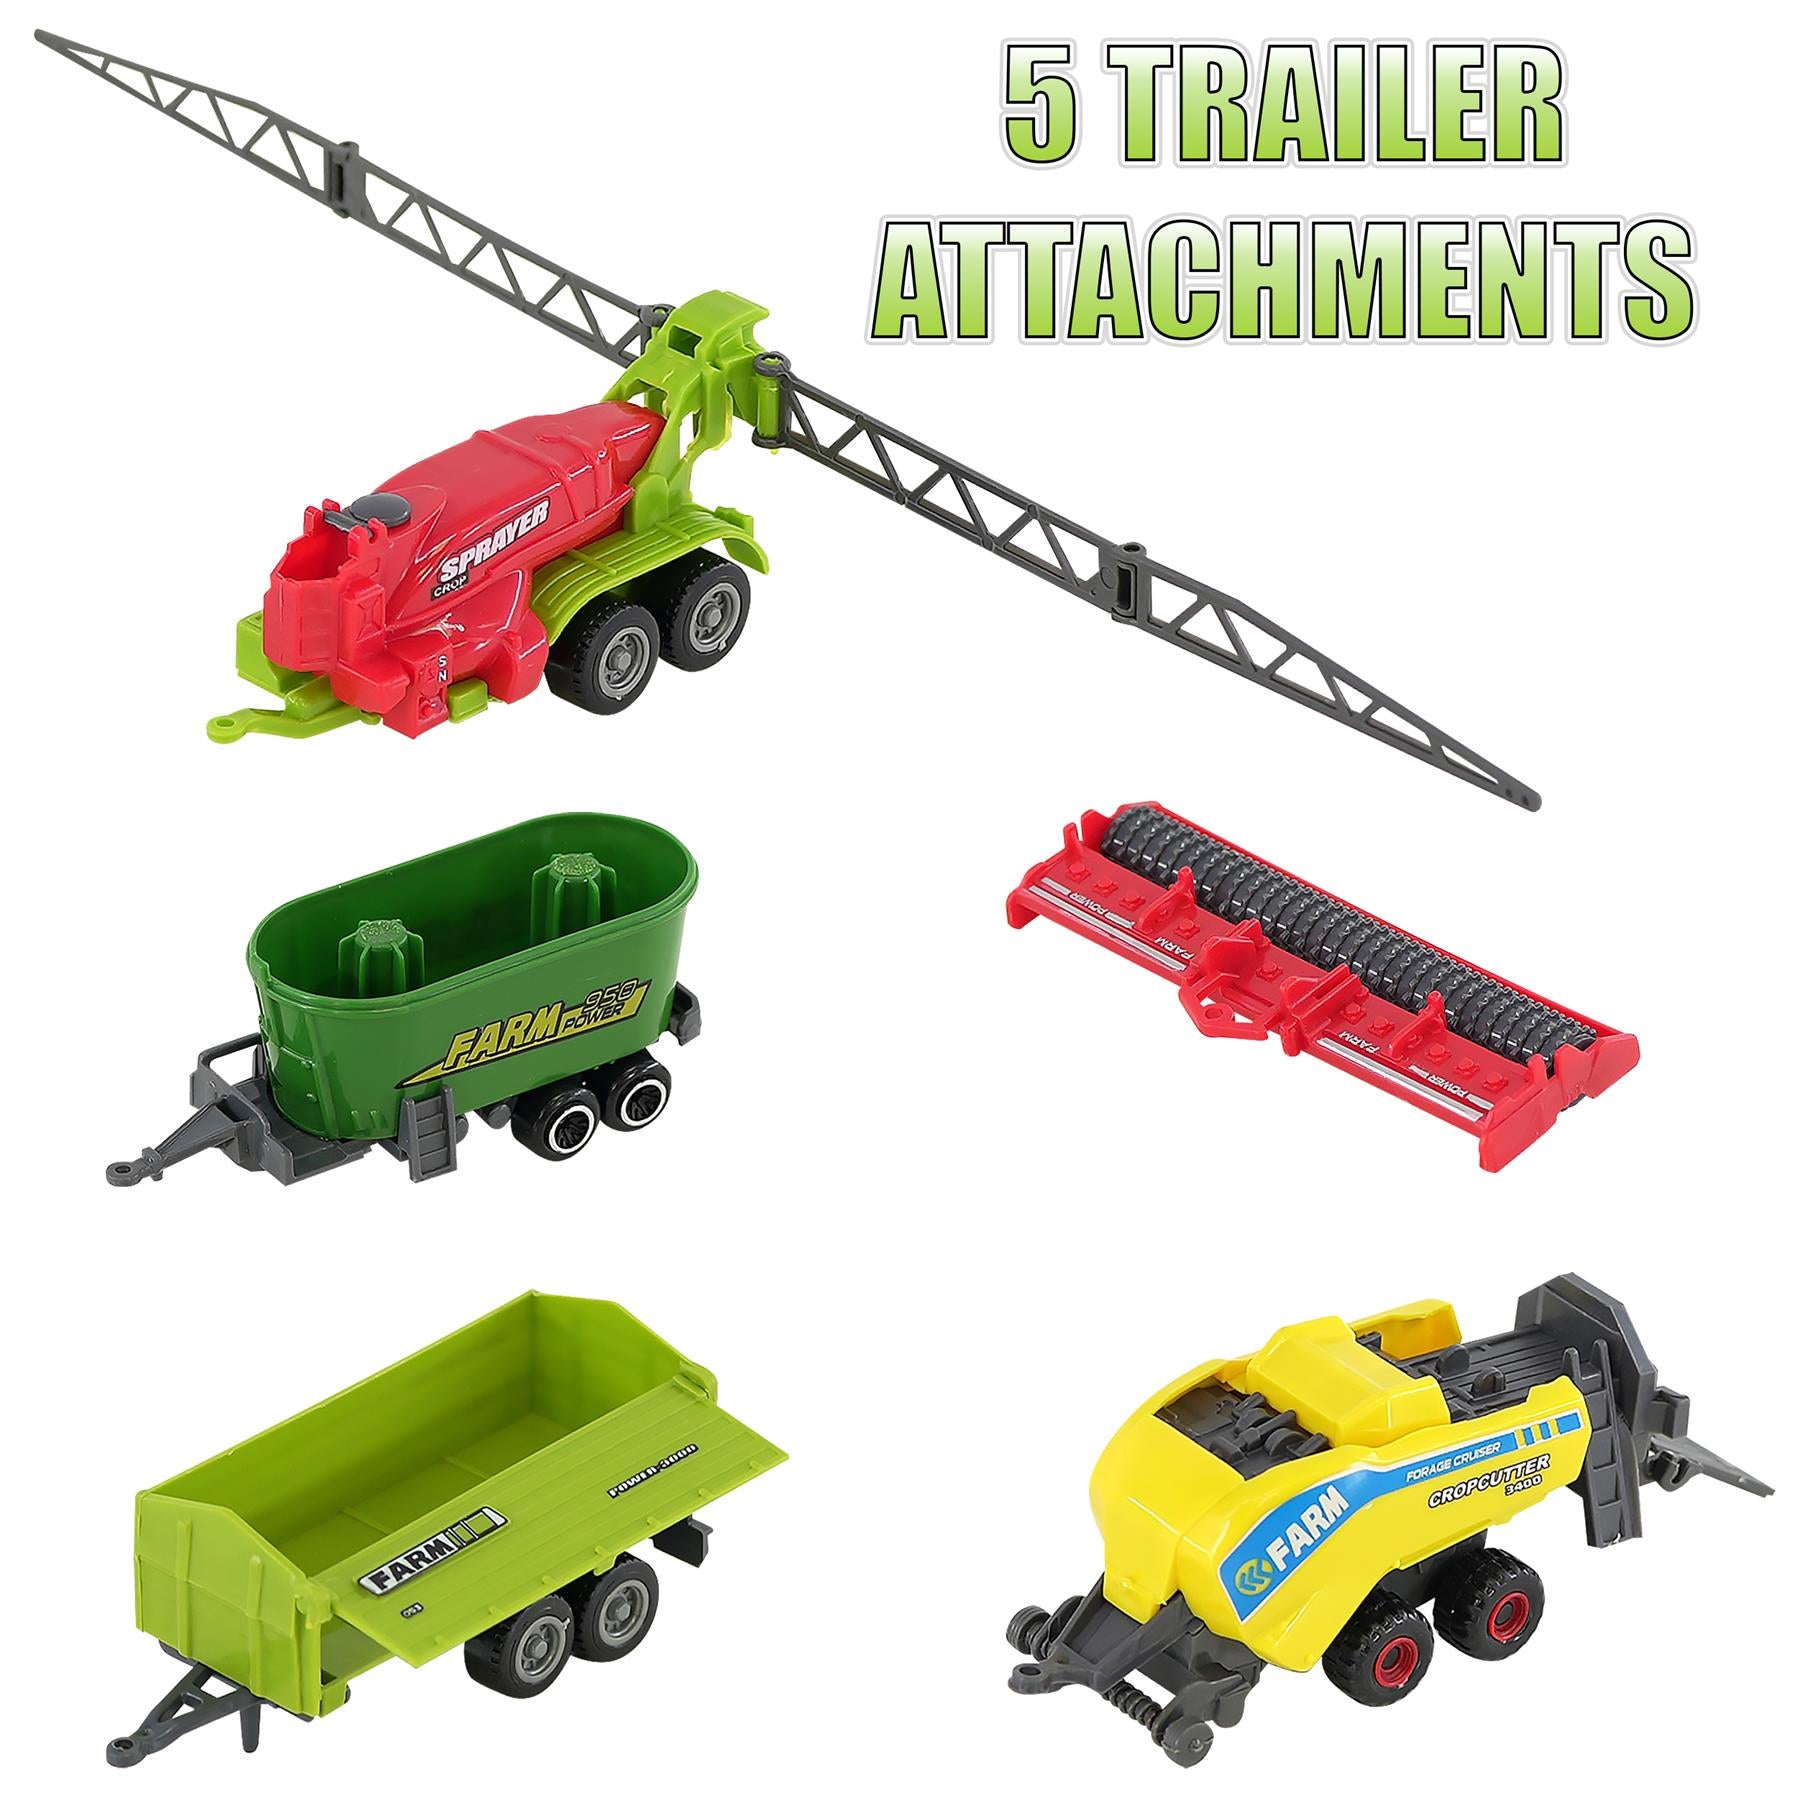 The Magic Toy Shop DieCast Car Set Diecast Tractor Set Collect Vehicles Play Set 22 Piece